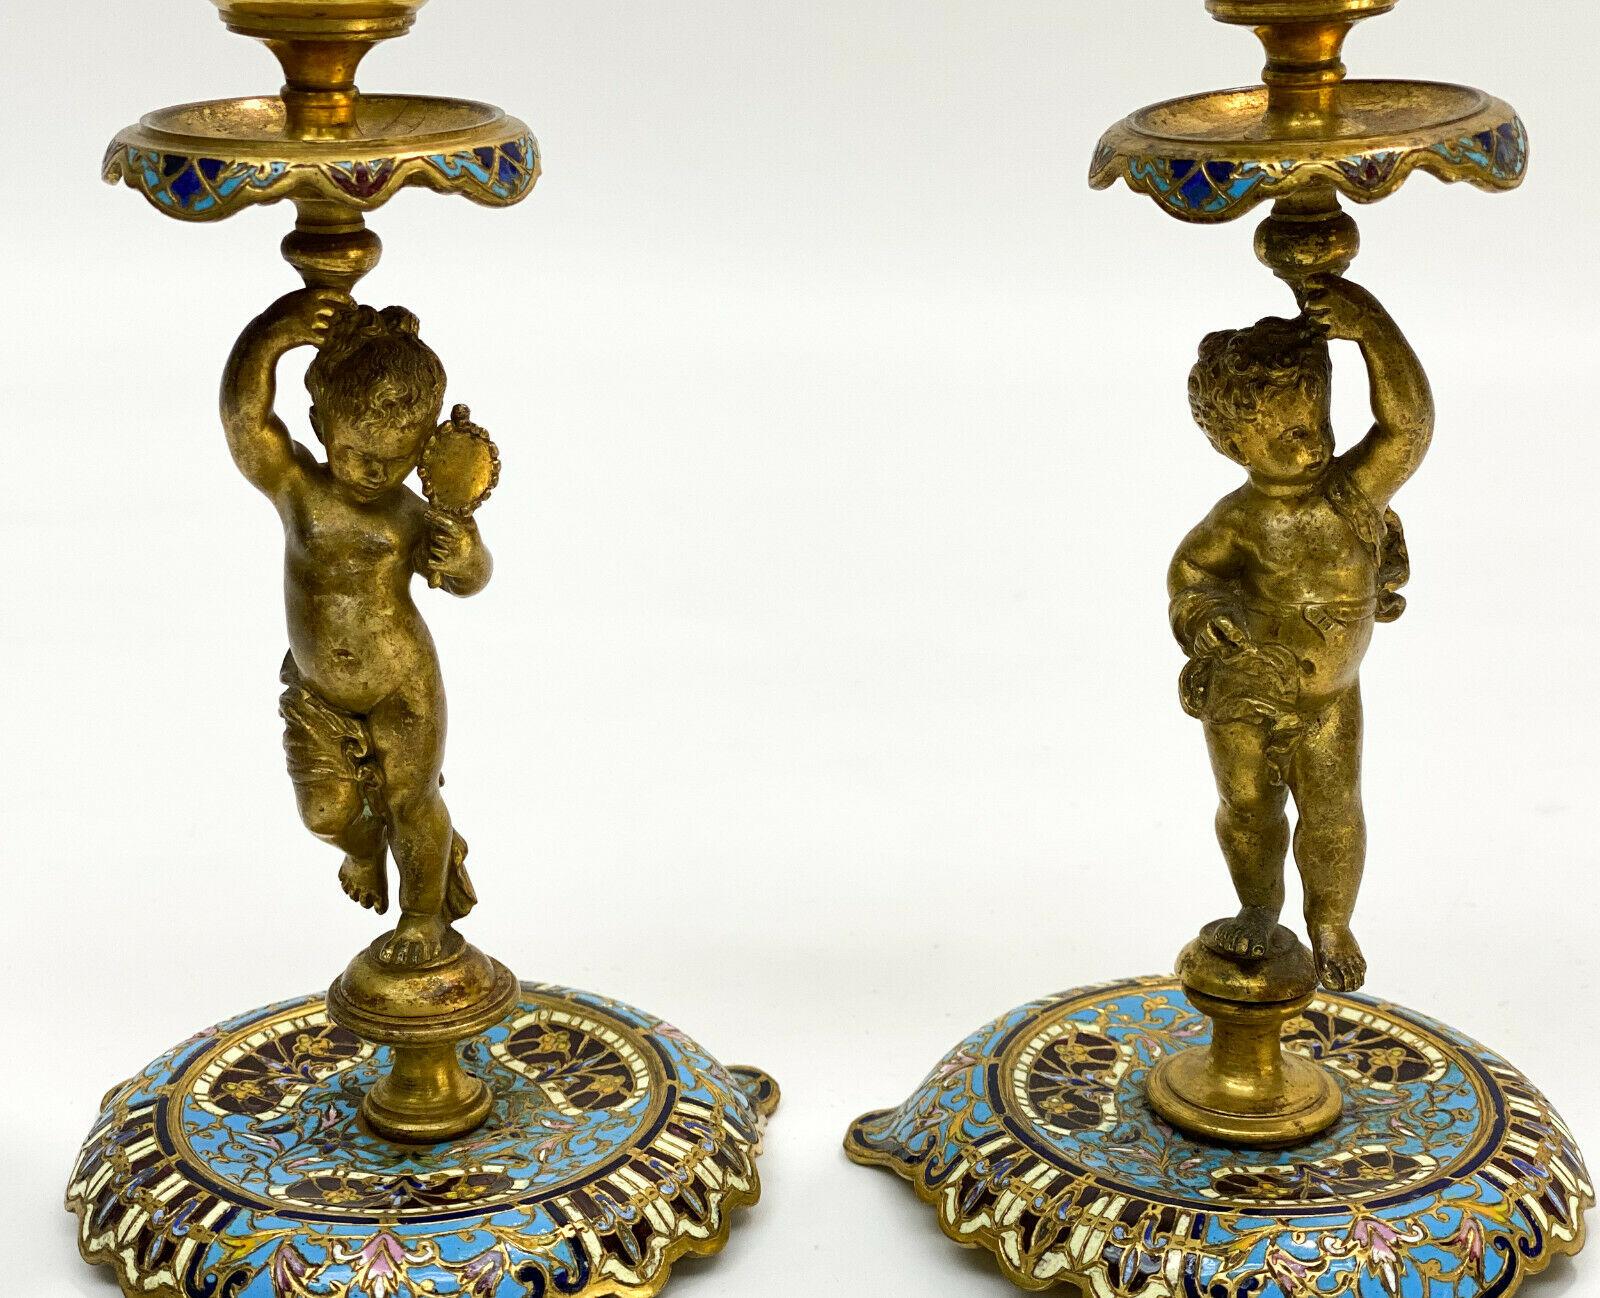 Pair of French Champleve Enamel Bronze Candlesticks, Late 19th Century

Blue and pink floral enamel t0 base and sconce. The stem depicts two putti with ribbons adorning their bodies.

Additional Information:
Material: Bronze, Enamel 
Model: